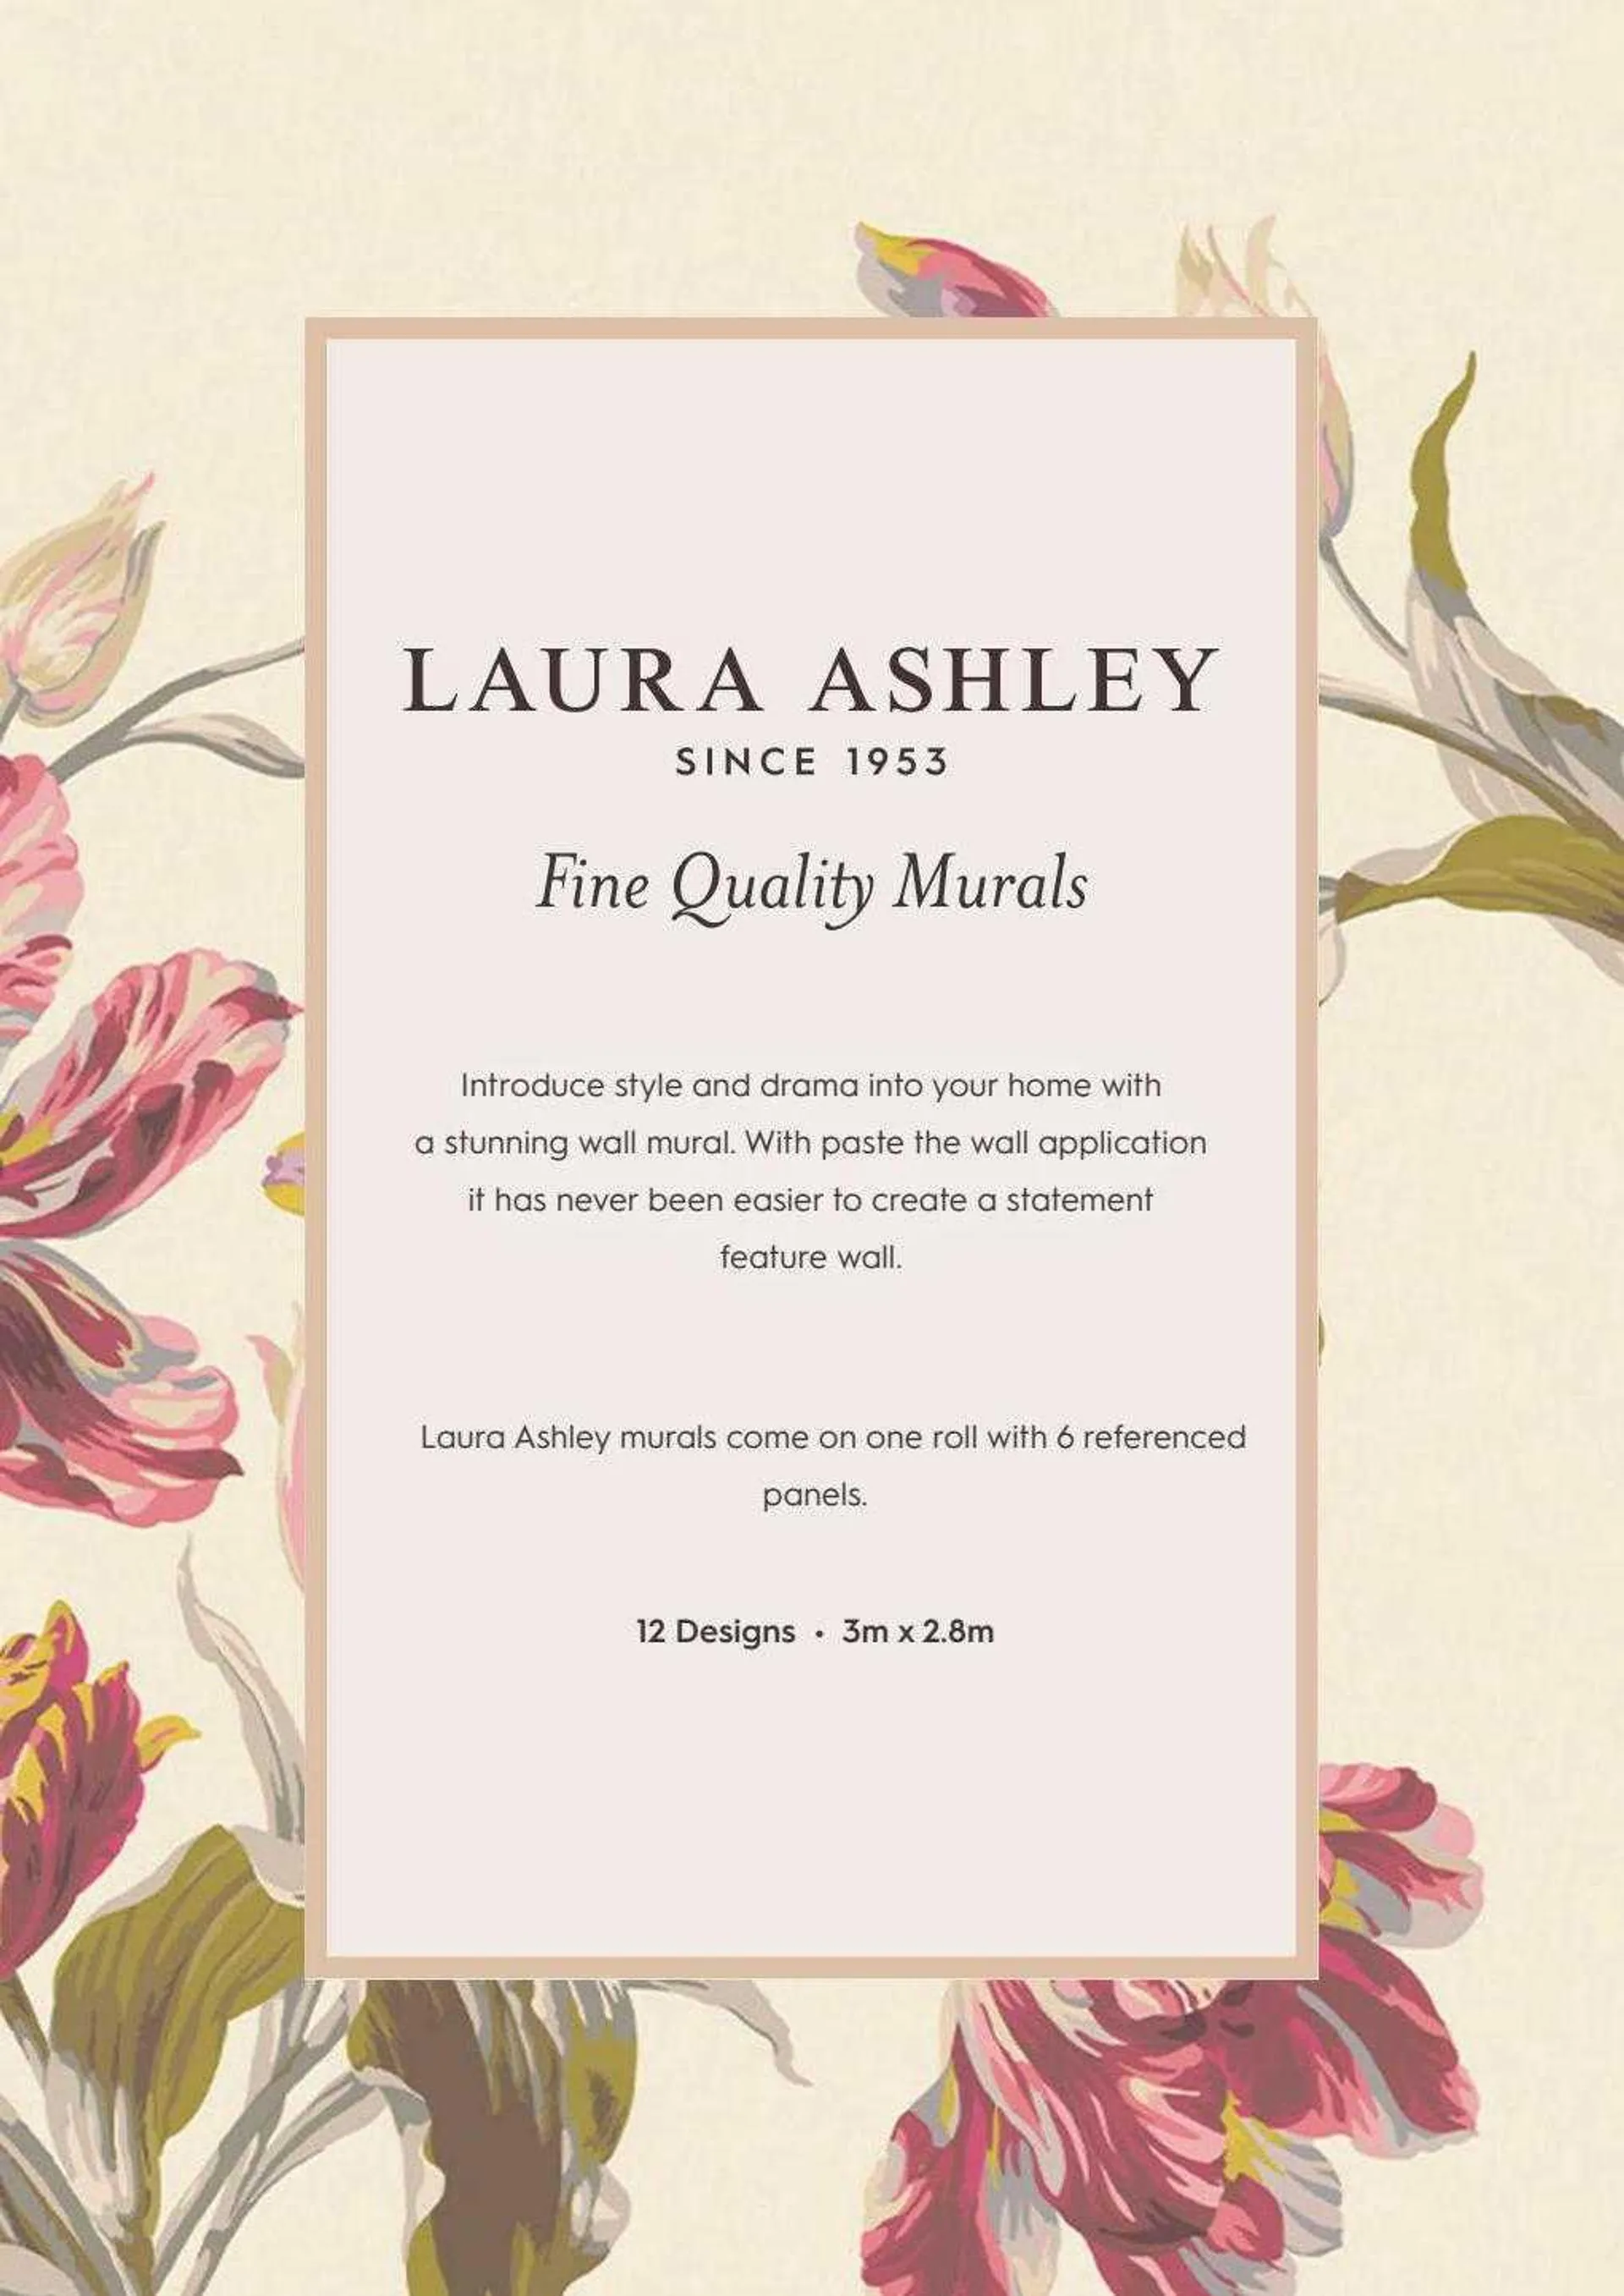 Laura Ashley Weekly Offers - 3